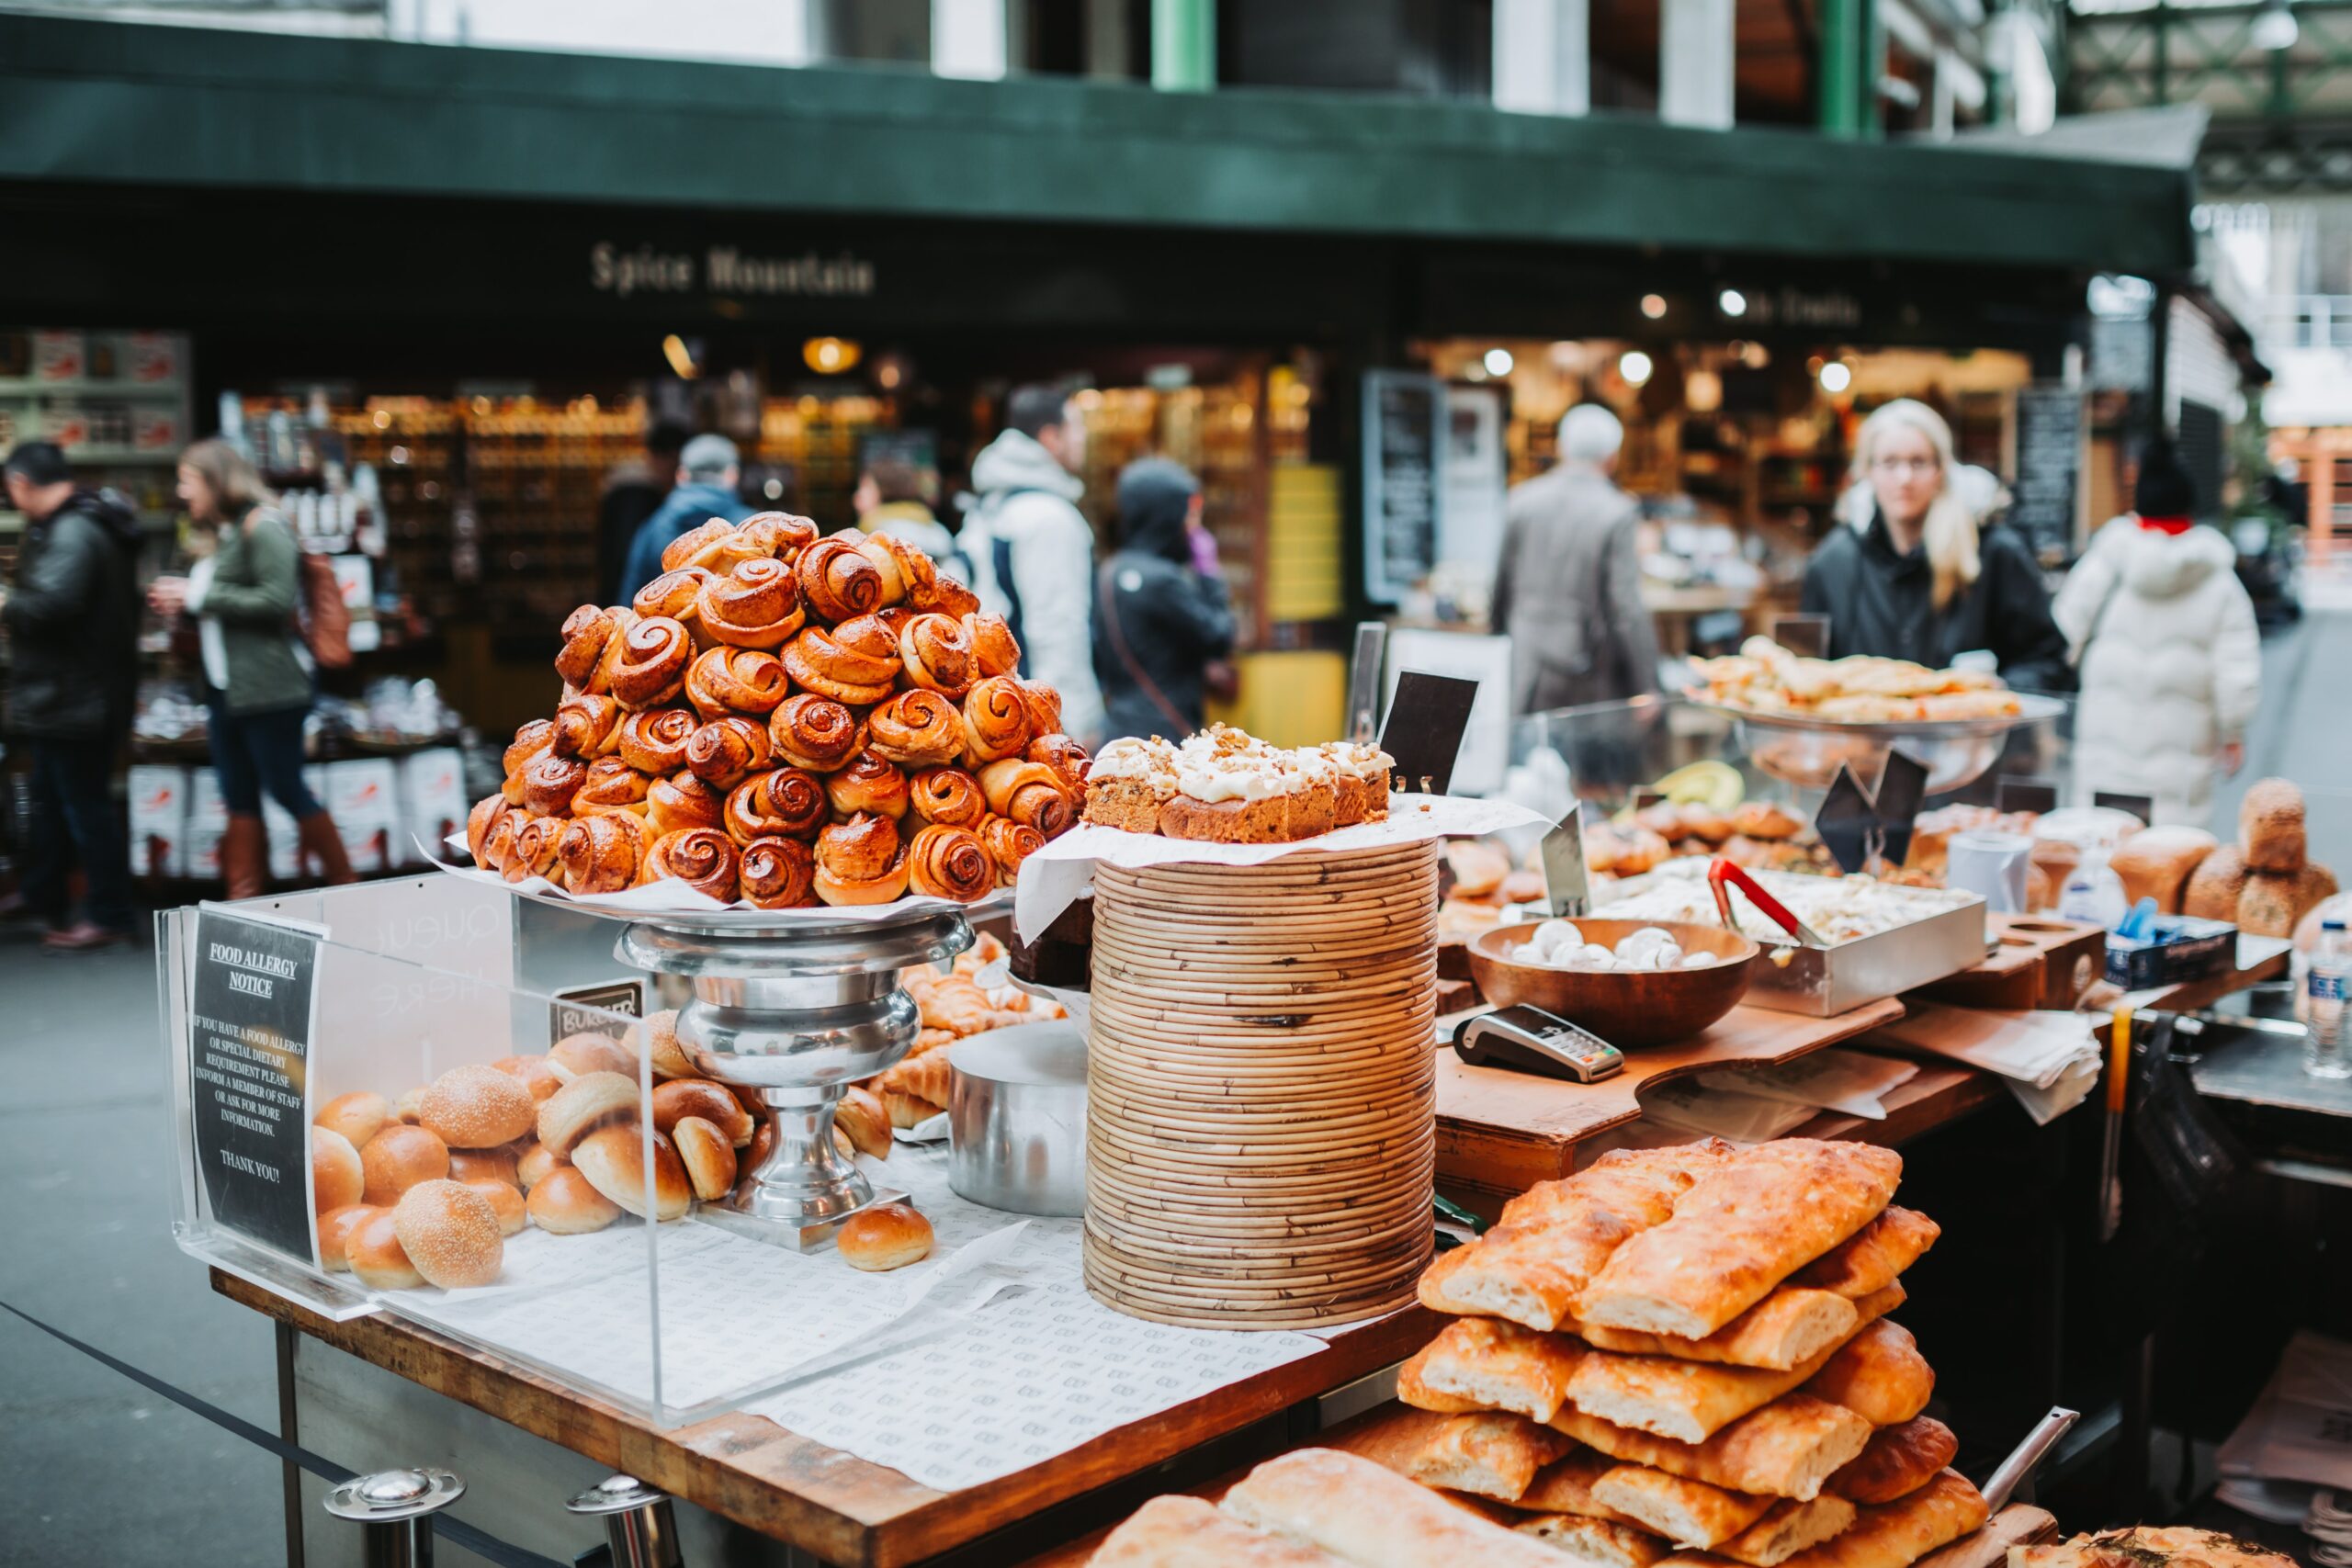 Borough Market bakery stand with cinnamon rolls and buns